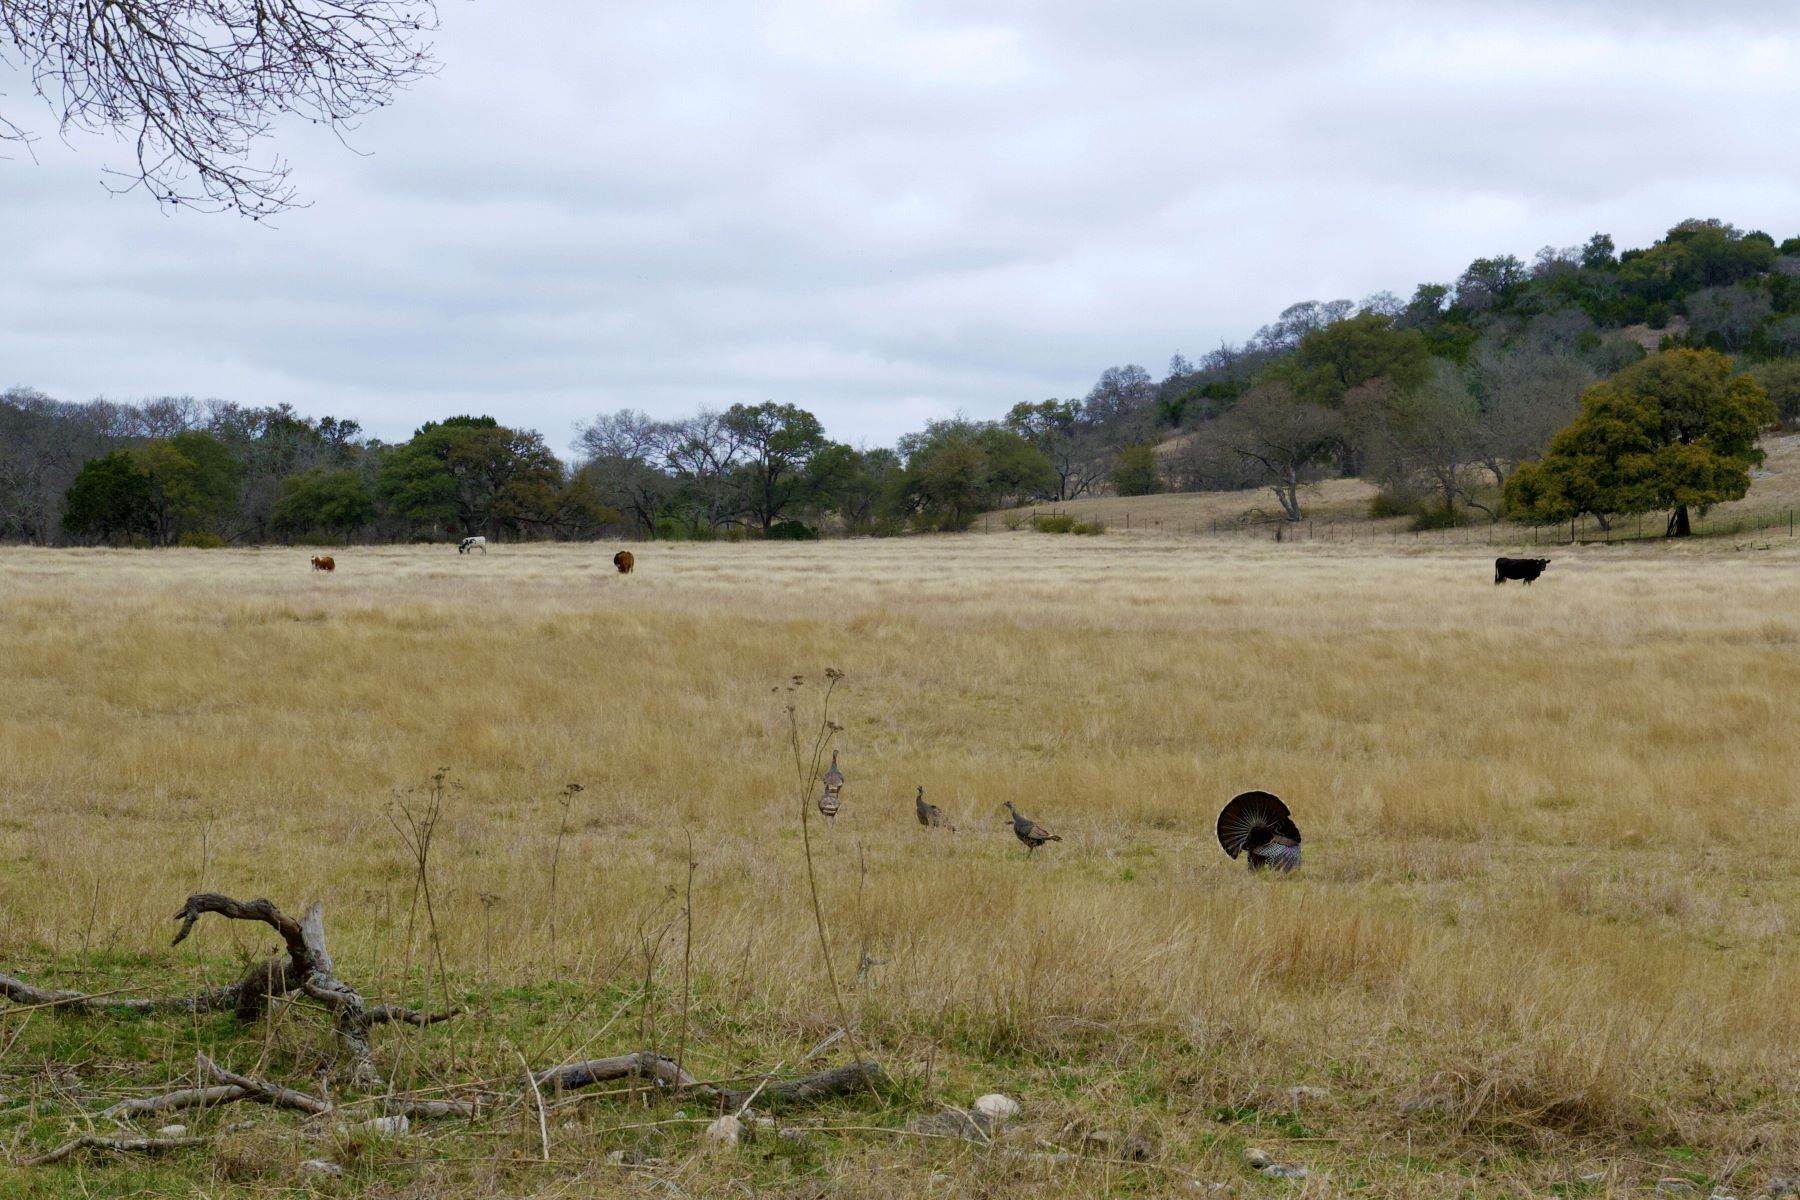 28. Farm and Ranch Properties for Sale at 2,269.85+/- Acres Less Ranch, Kendall County, Boerne, TX 78006 2,269.85+/- Acres Less Ranch, Kendall County, 650 Wild Turkey Blvd. Boerne, Texas 78006 United States